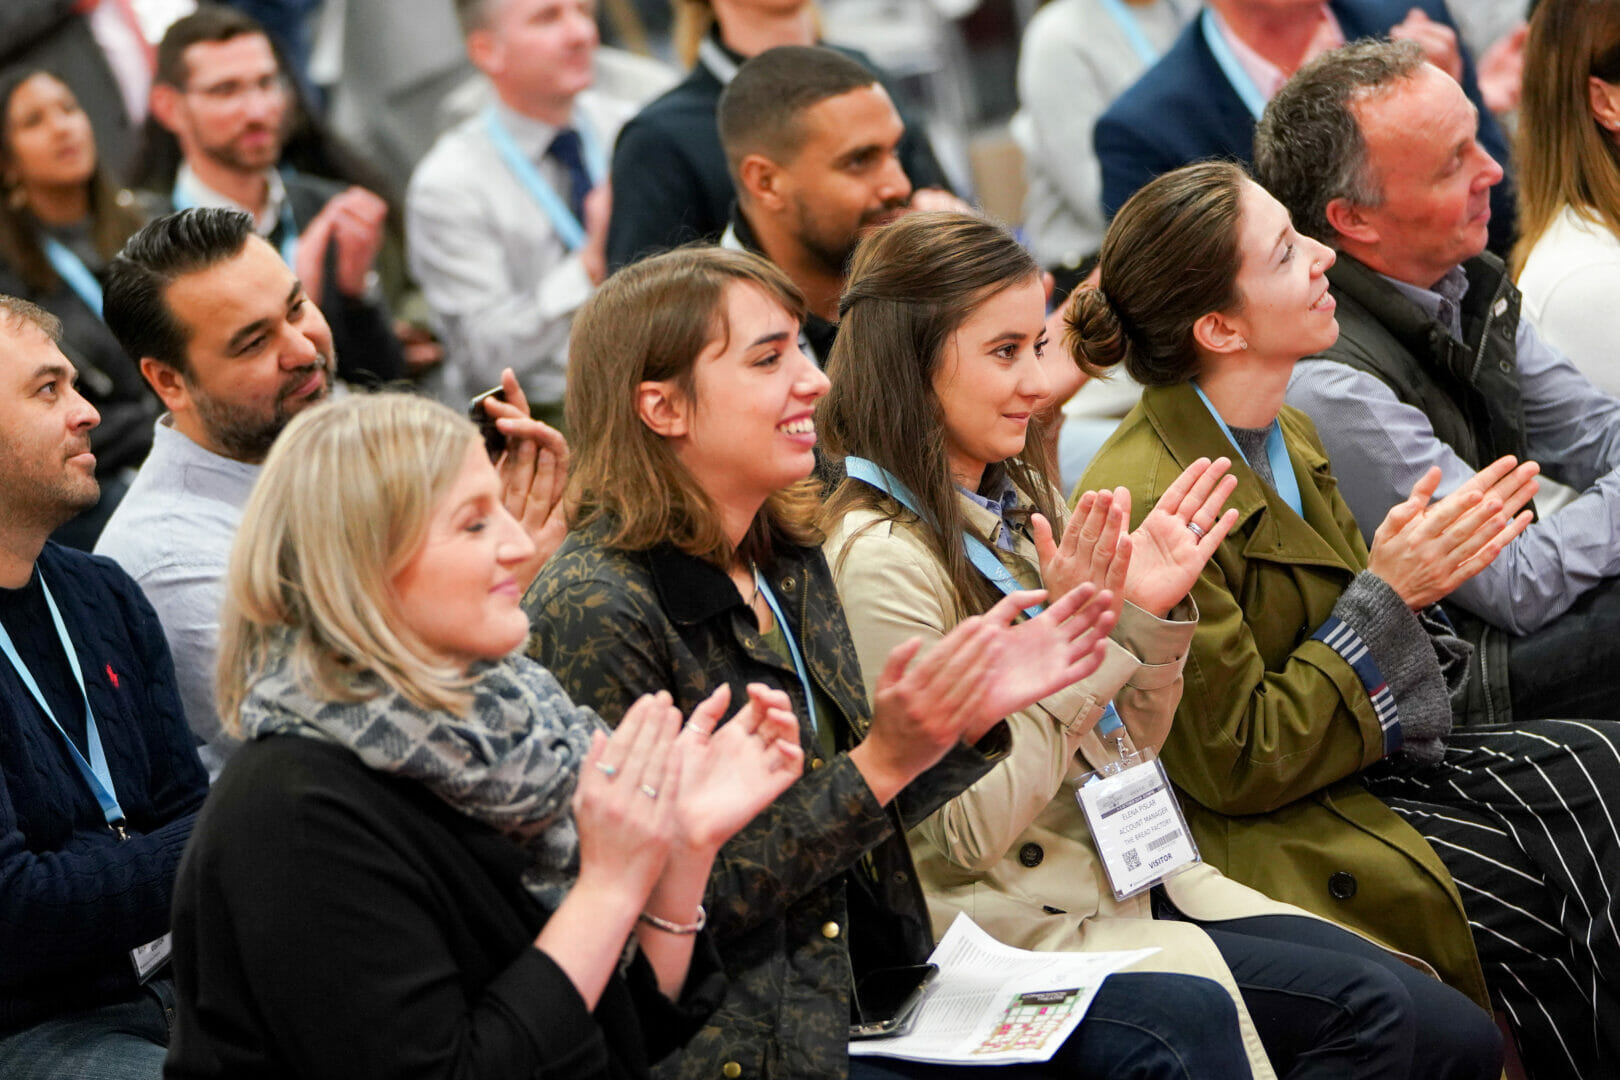 First look at the hottest topics up for debate at The Restaurant Show 2019